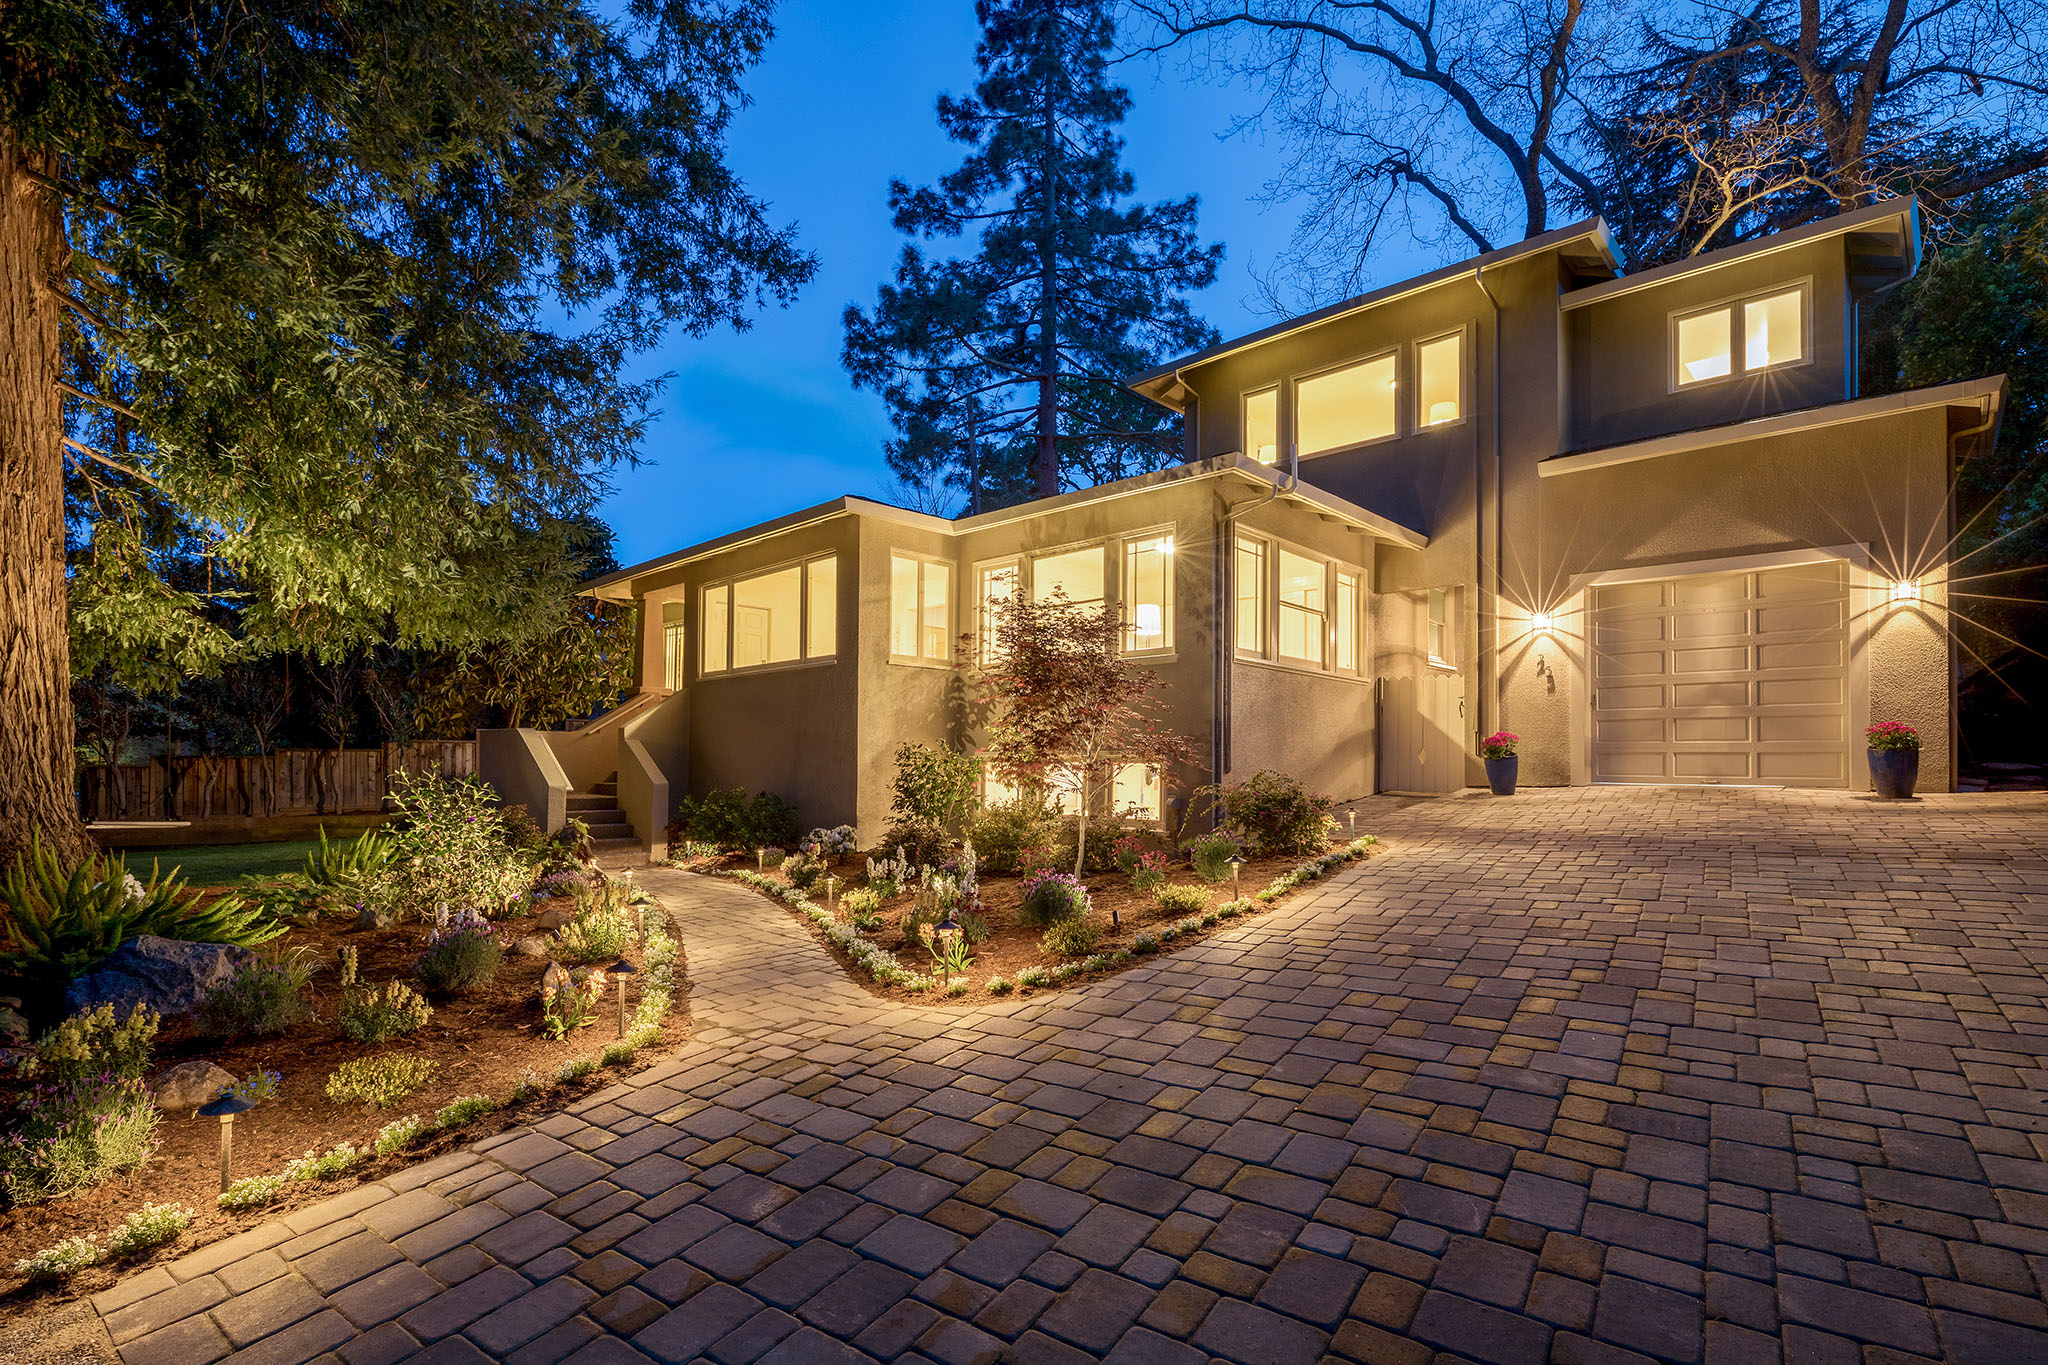 Image number 1 for slideshow of 25 Suffield Avenue, San Anselmo